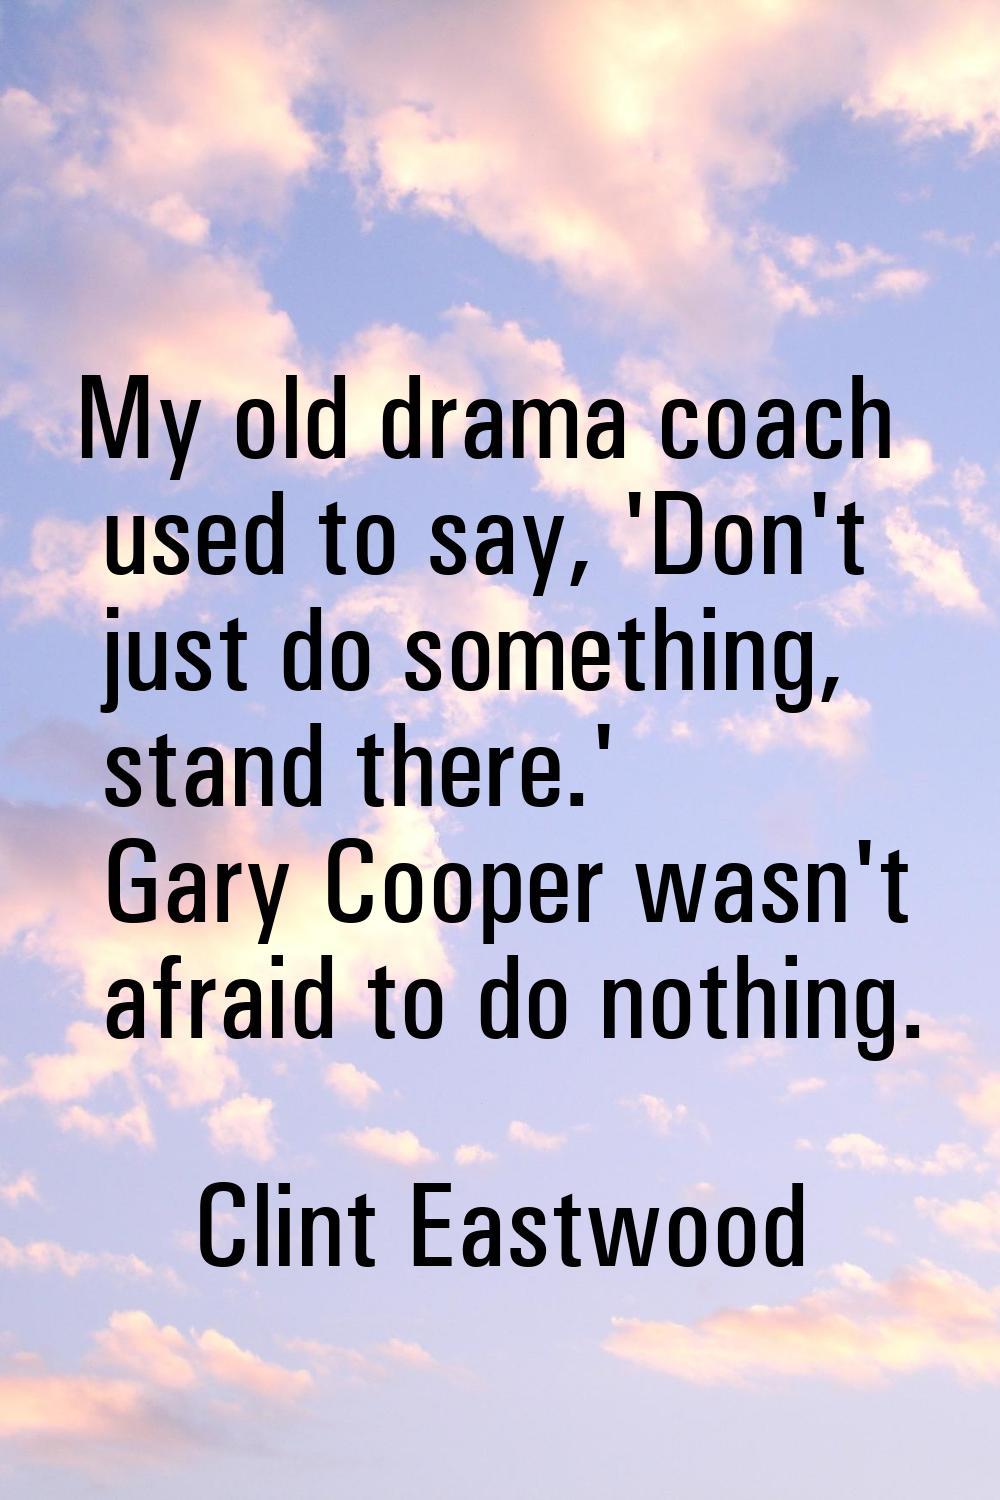 My old drama coach used to say, 'Don't just do something, stand there.' Gary Cooper wasn't afraid t